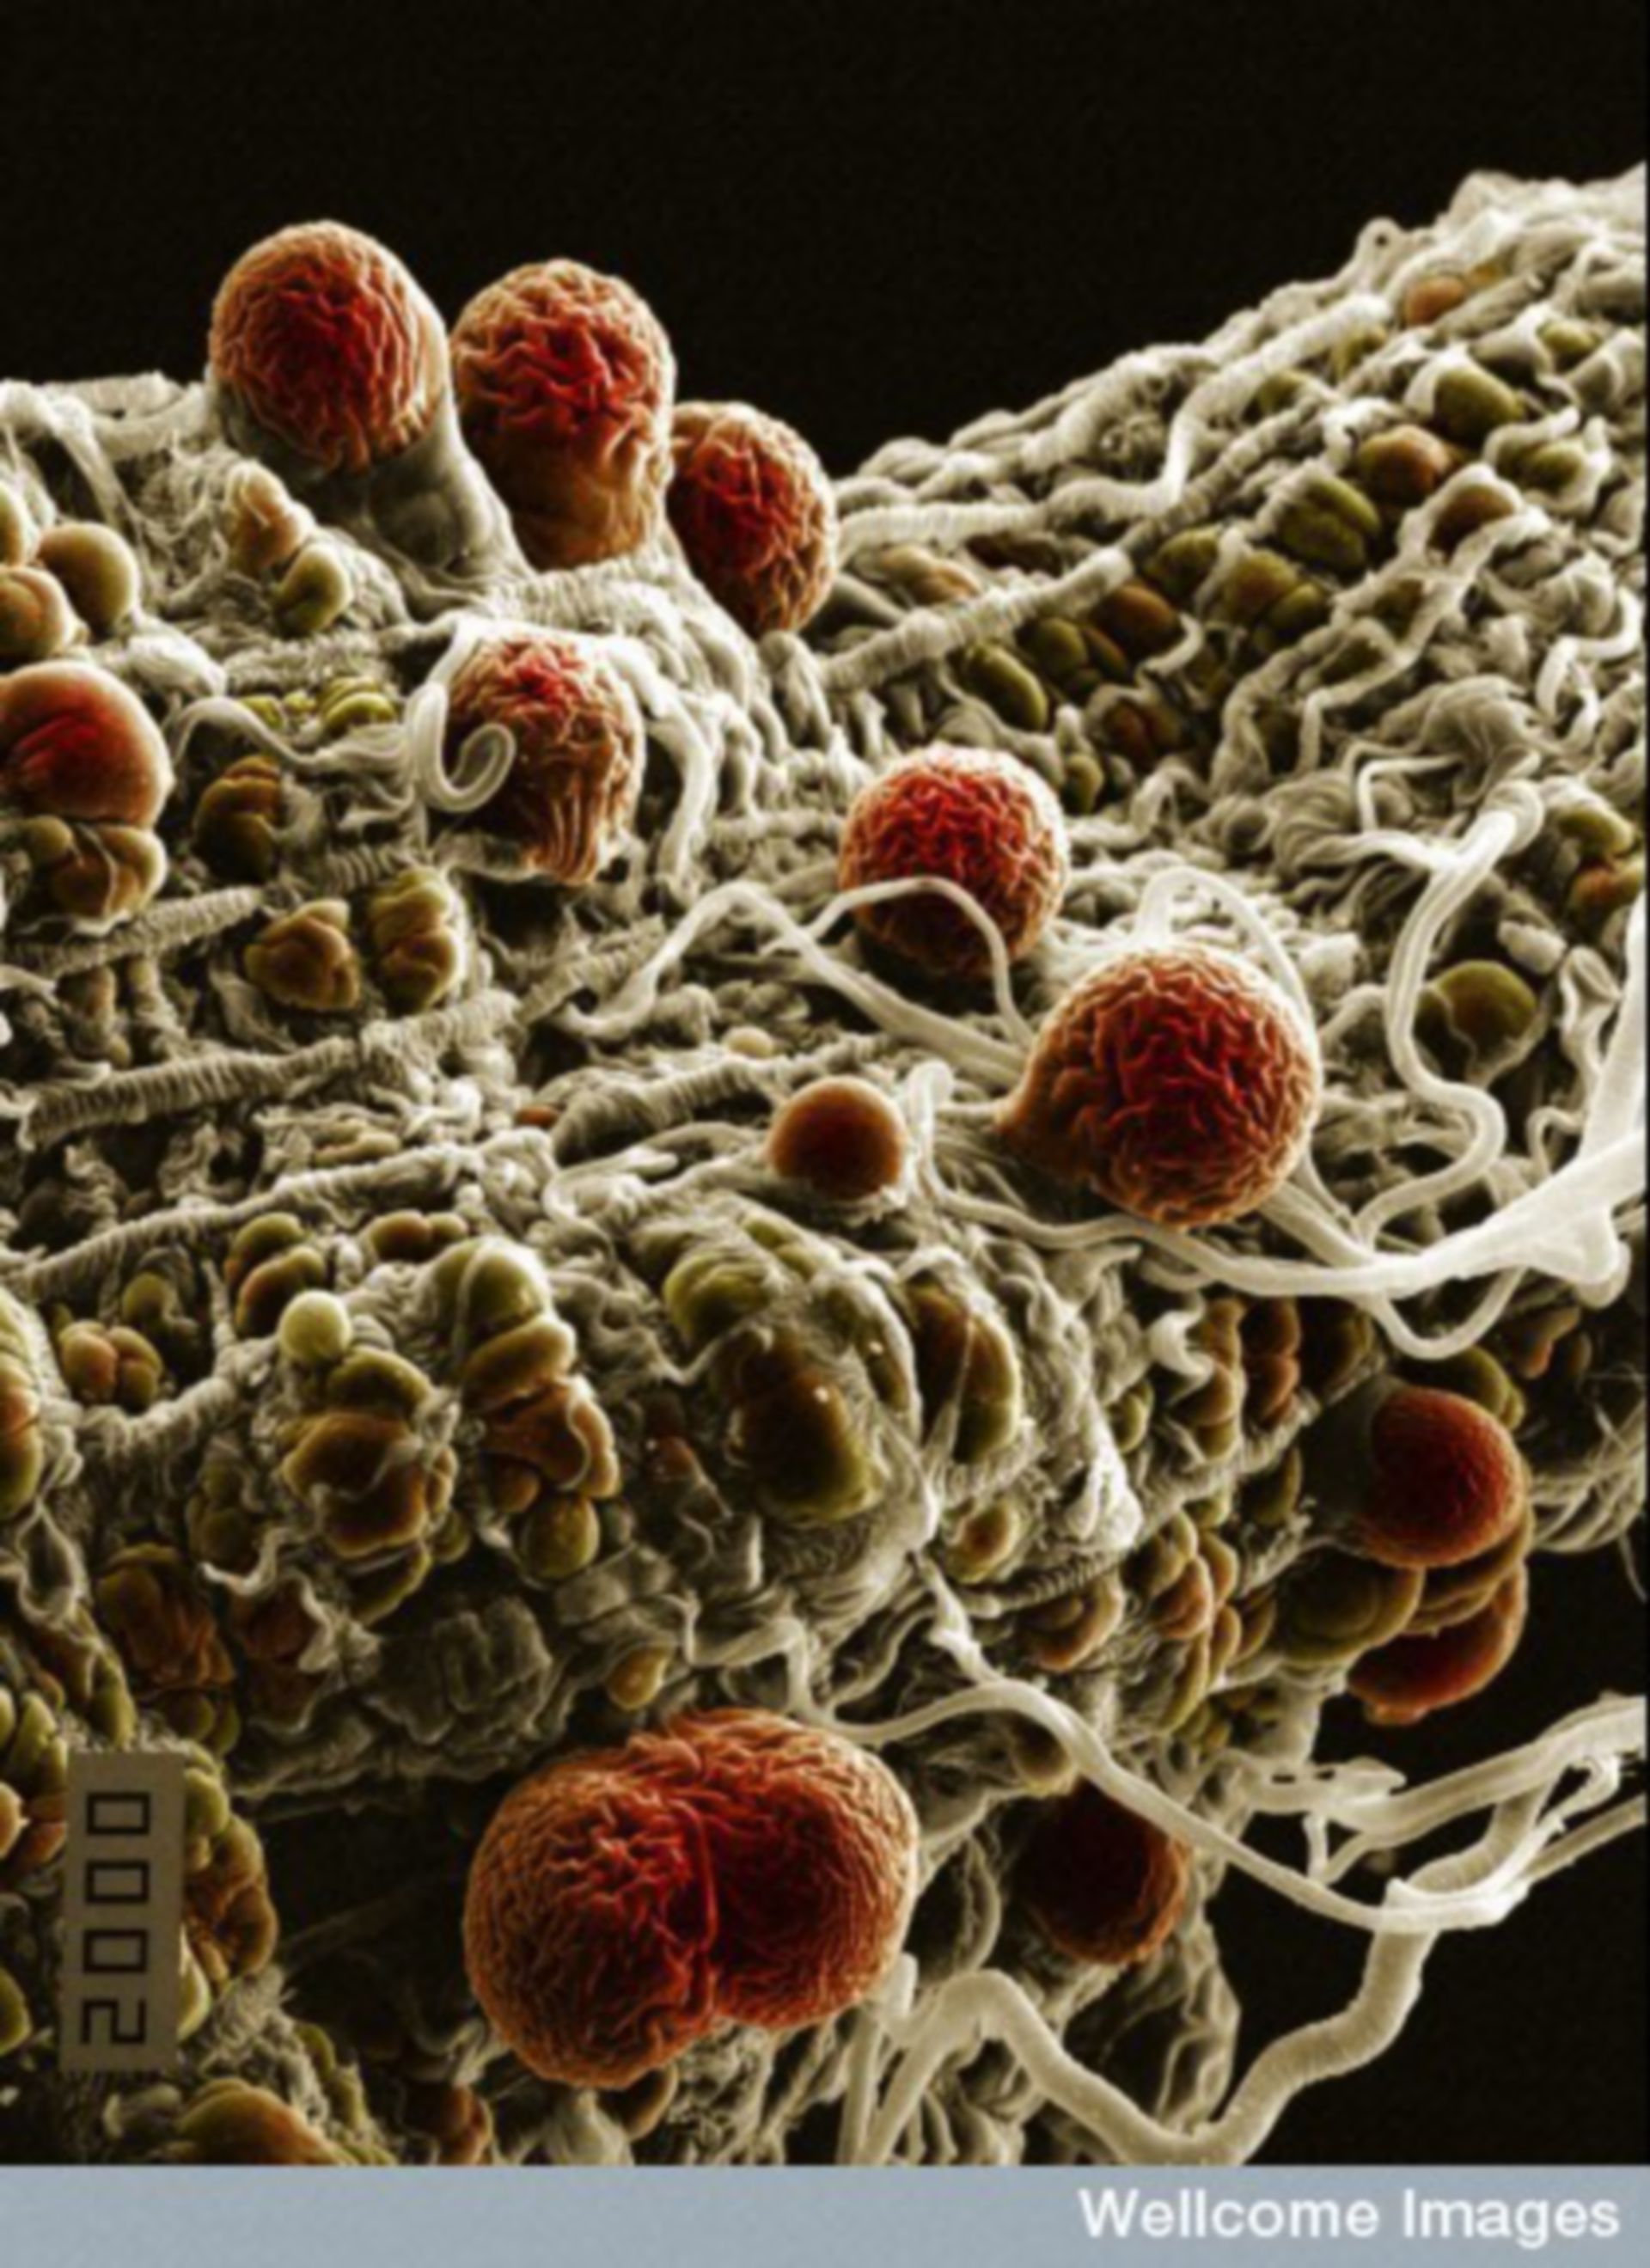 Malaria! Image of the Week - June 15, 2015 - CIL:39089